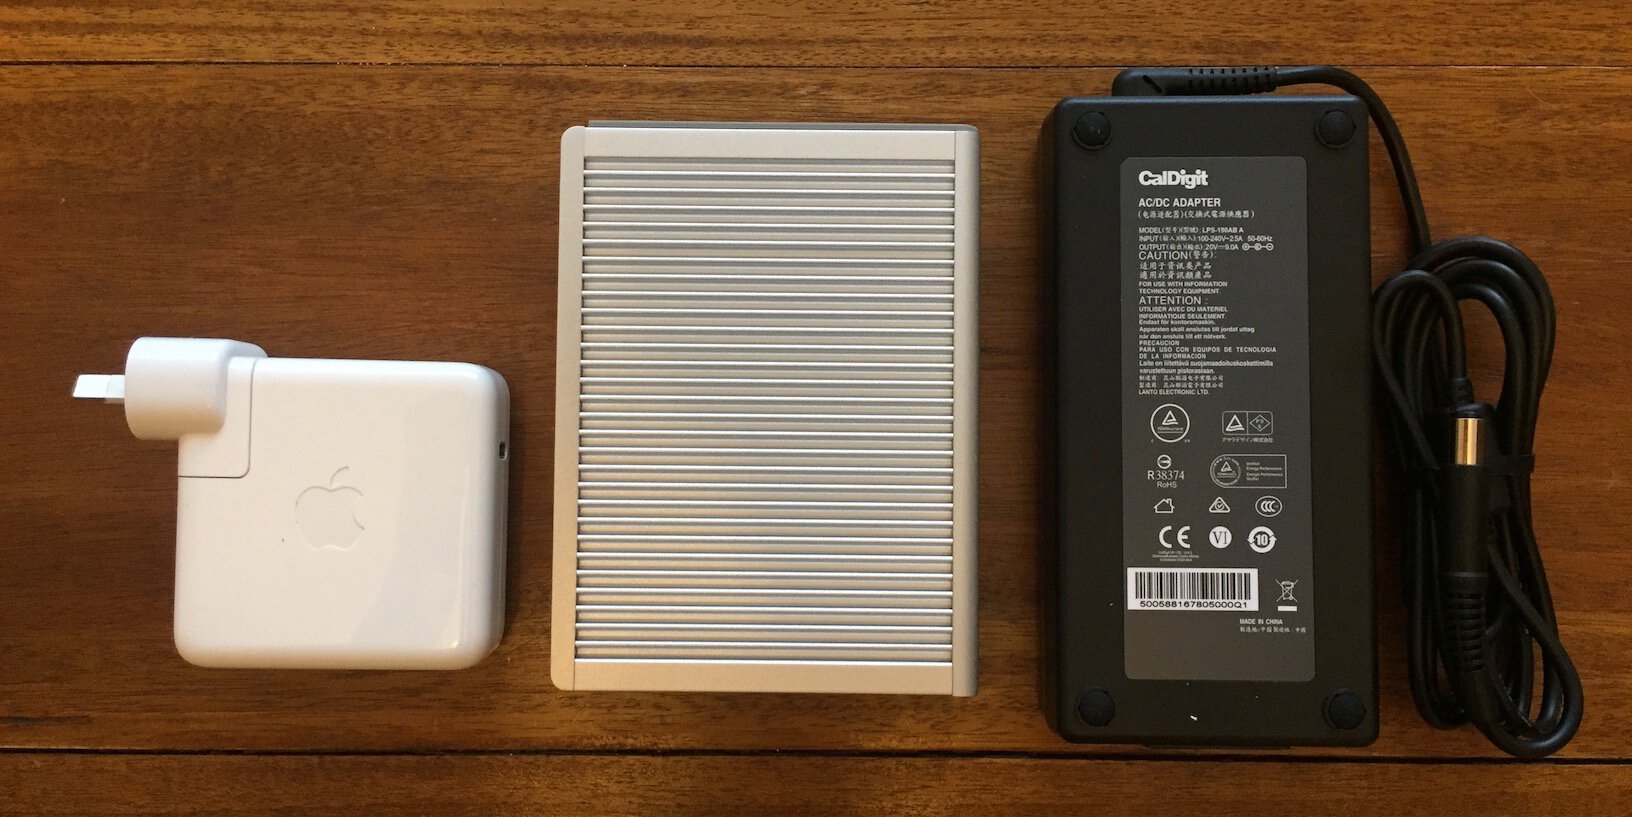 Comparing the size of the Caldigit TS3 Plus